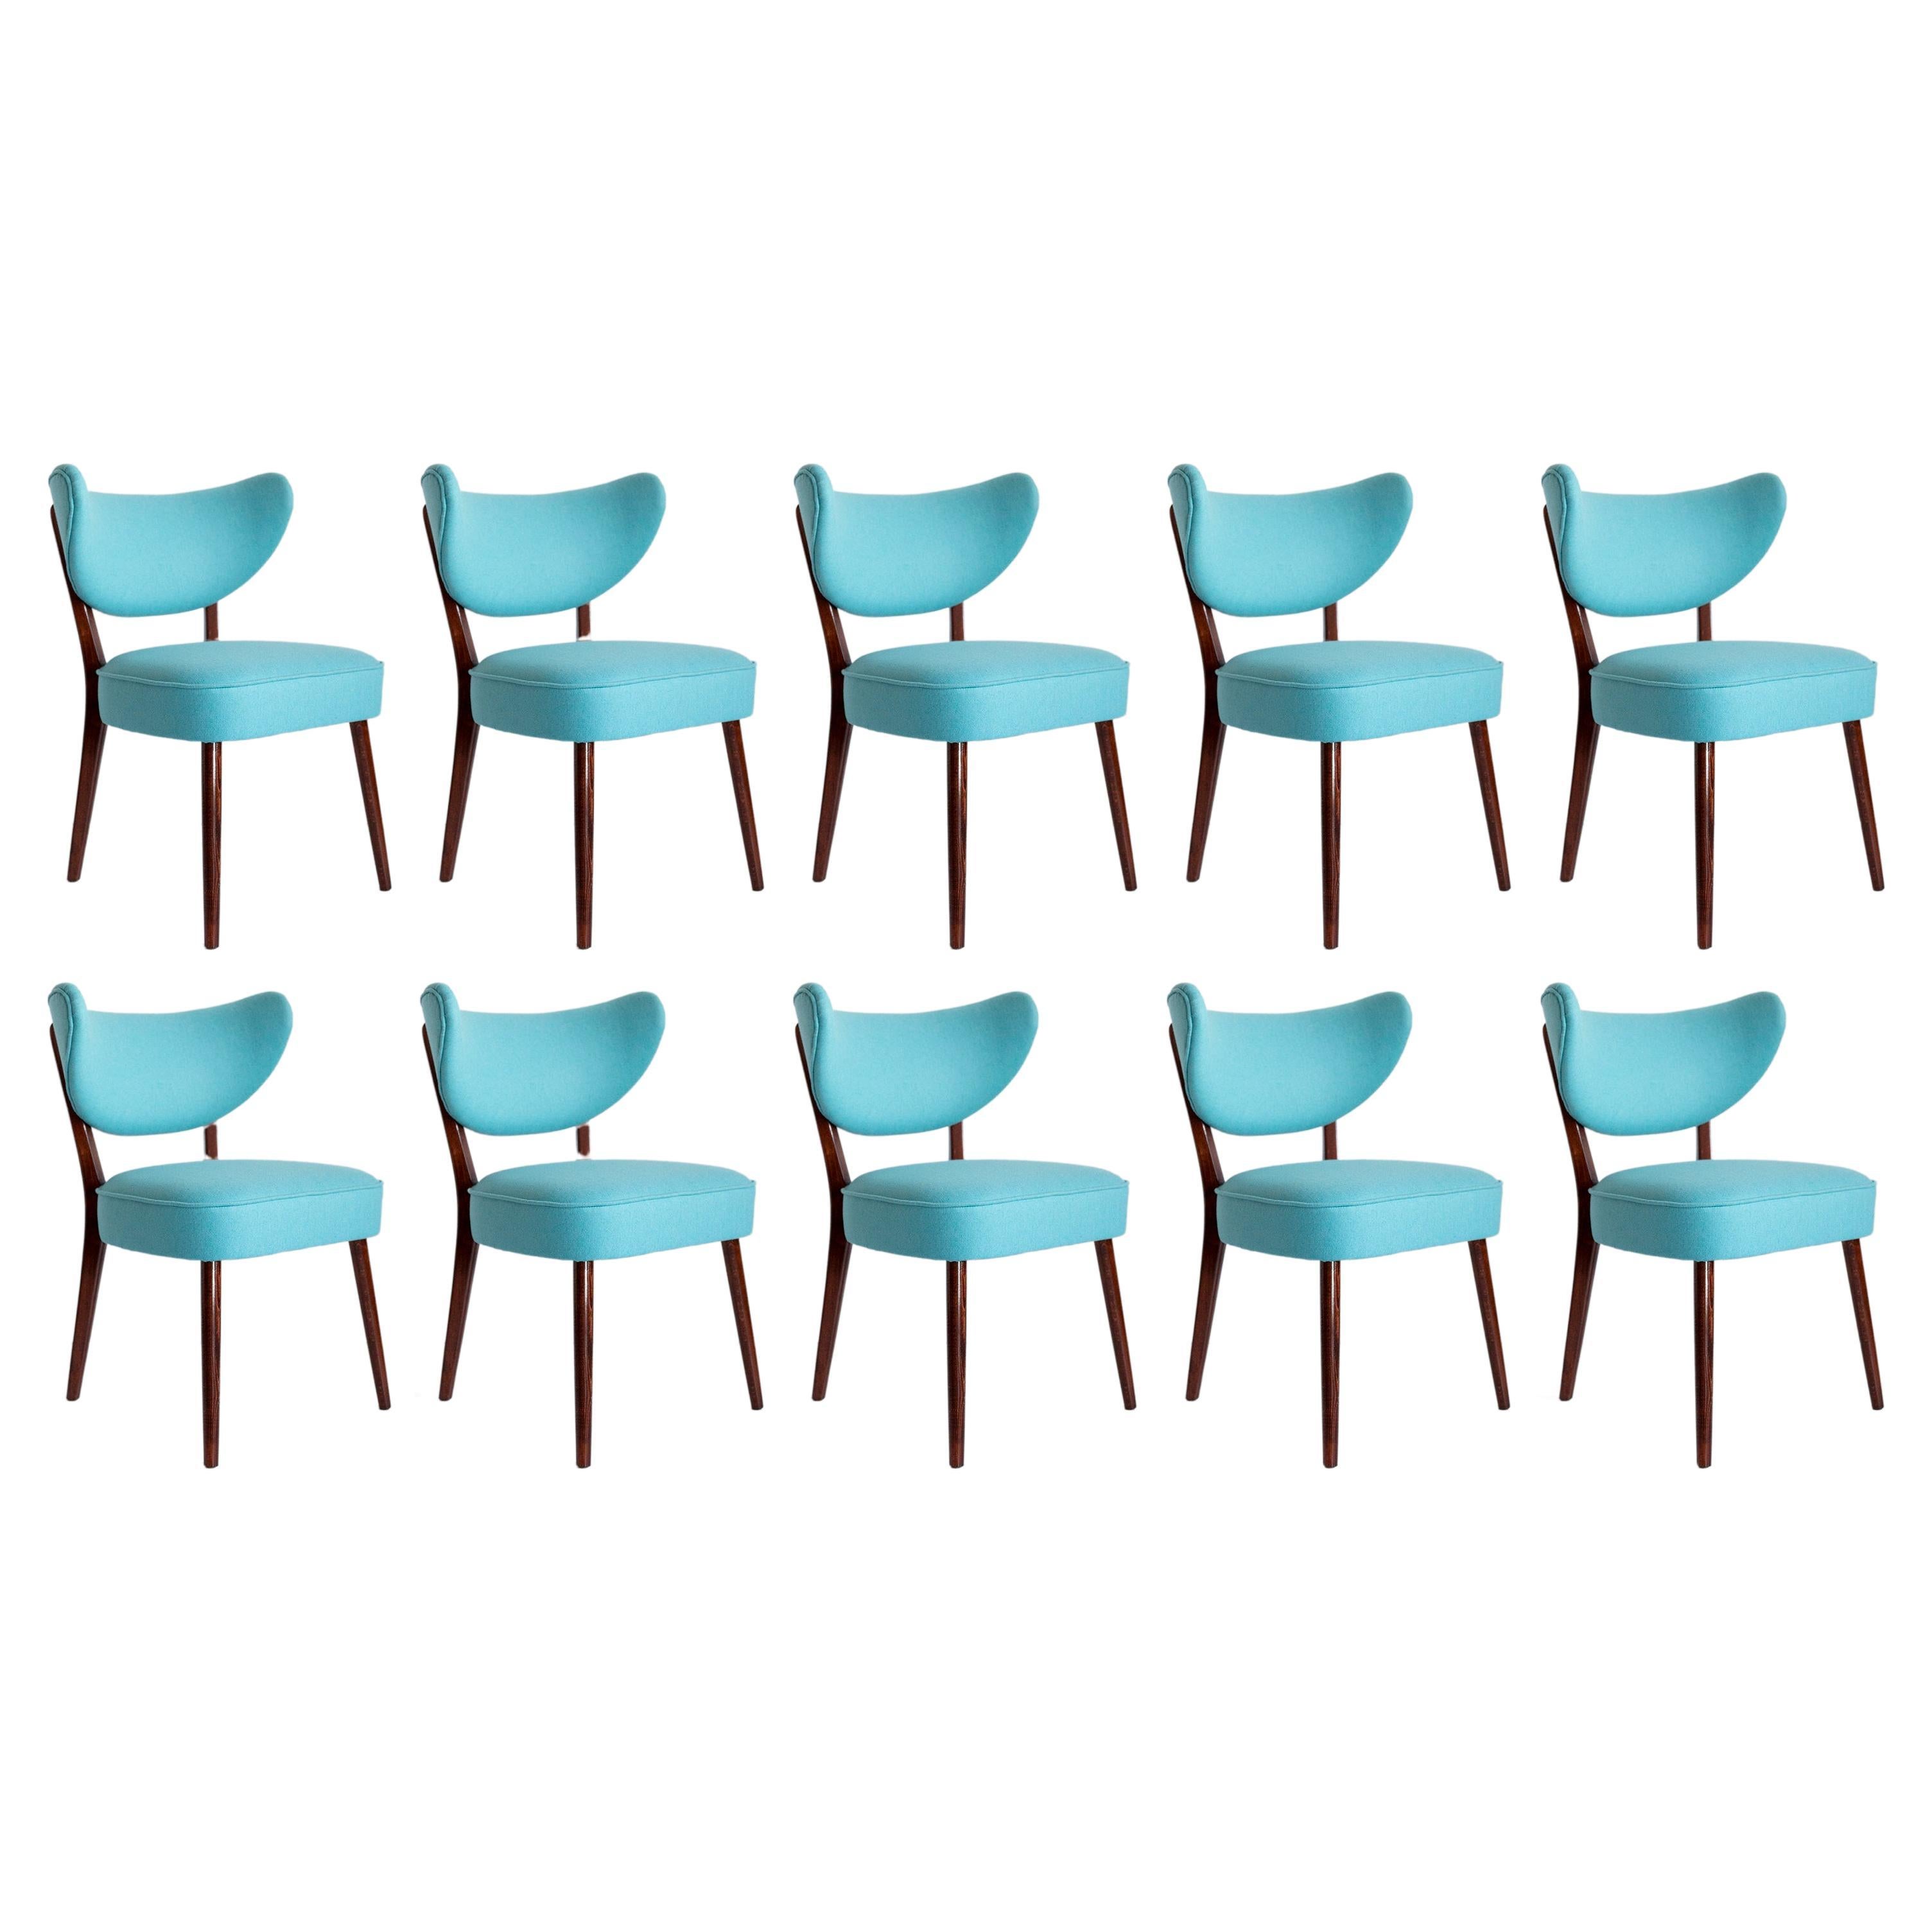 Set of Ten Shell Dining Chairs, Turquoise Wool, by Vintola Studio, Europe. For Sale